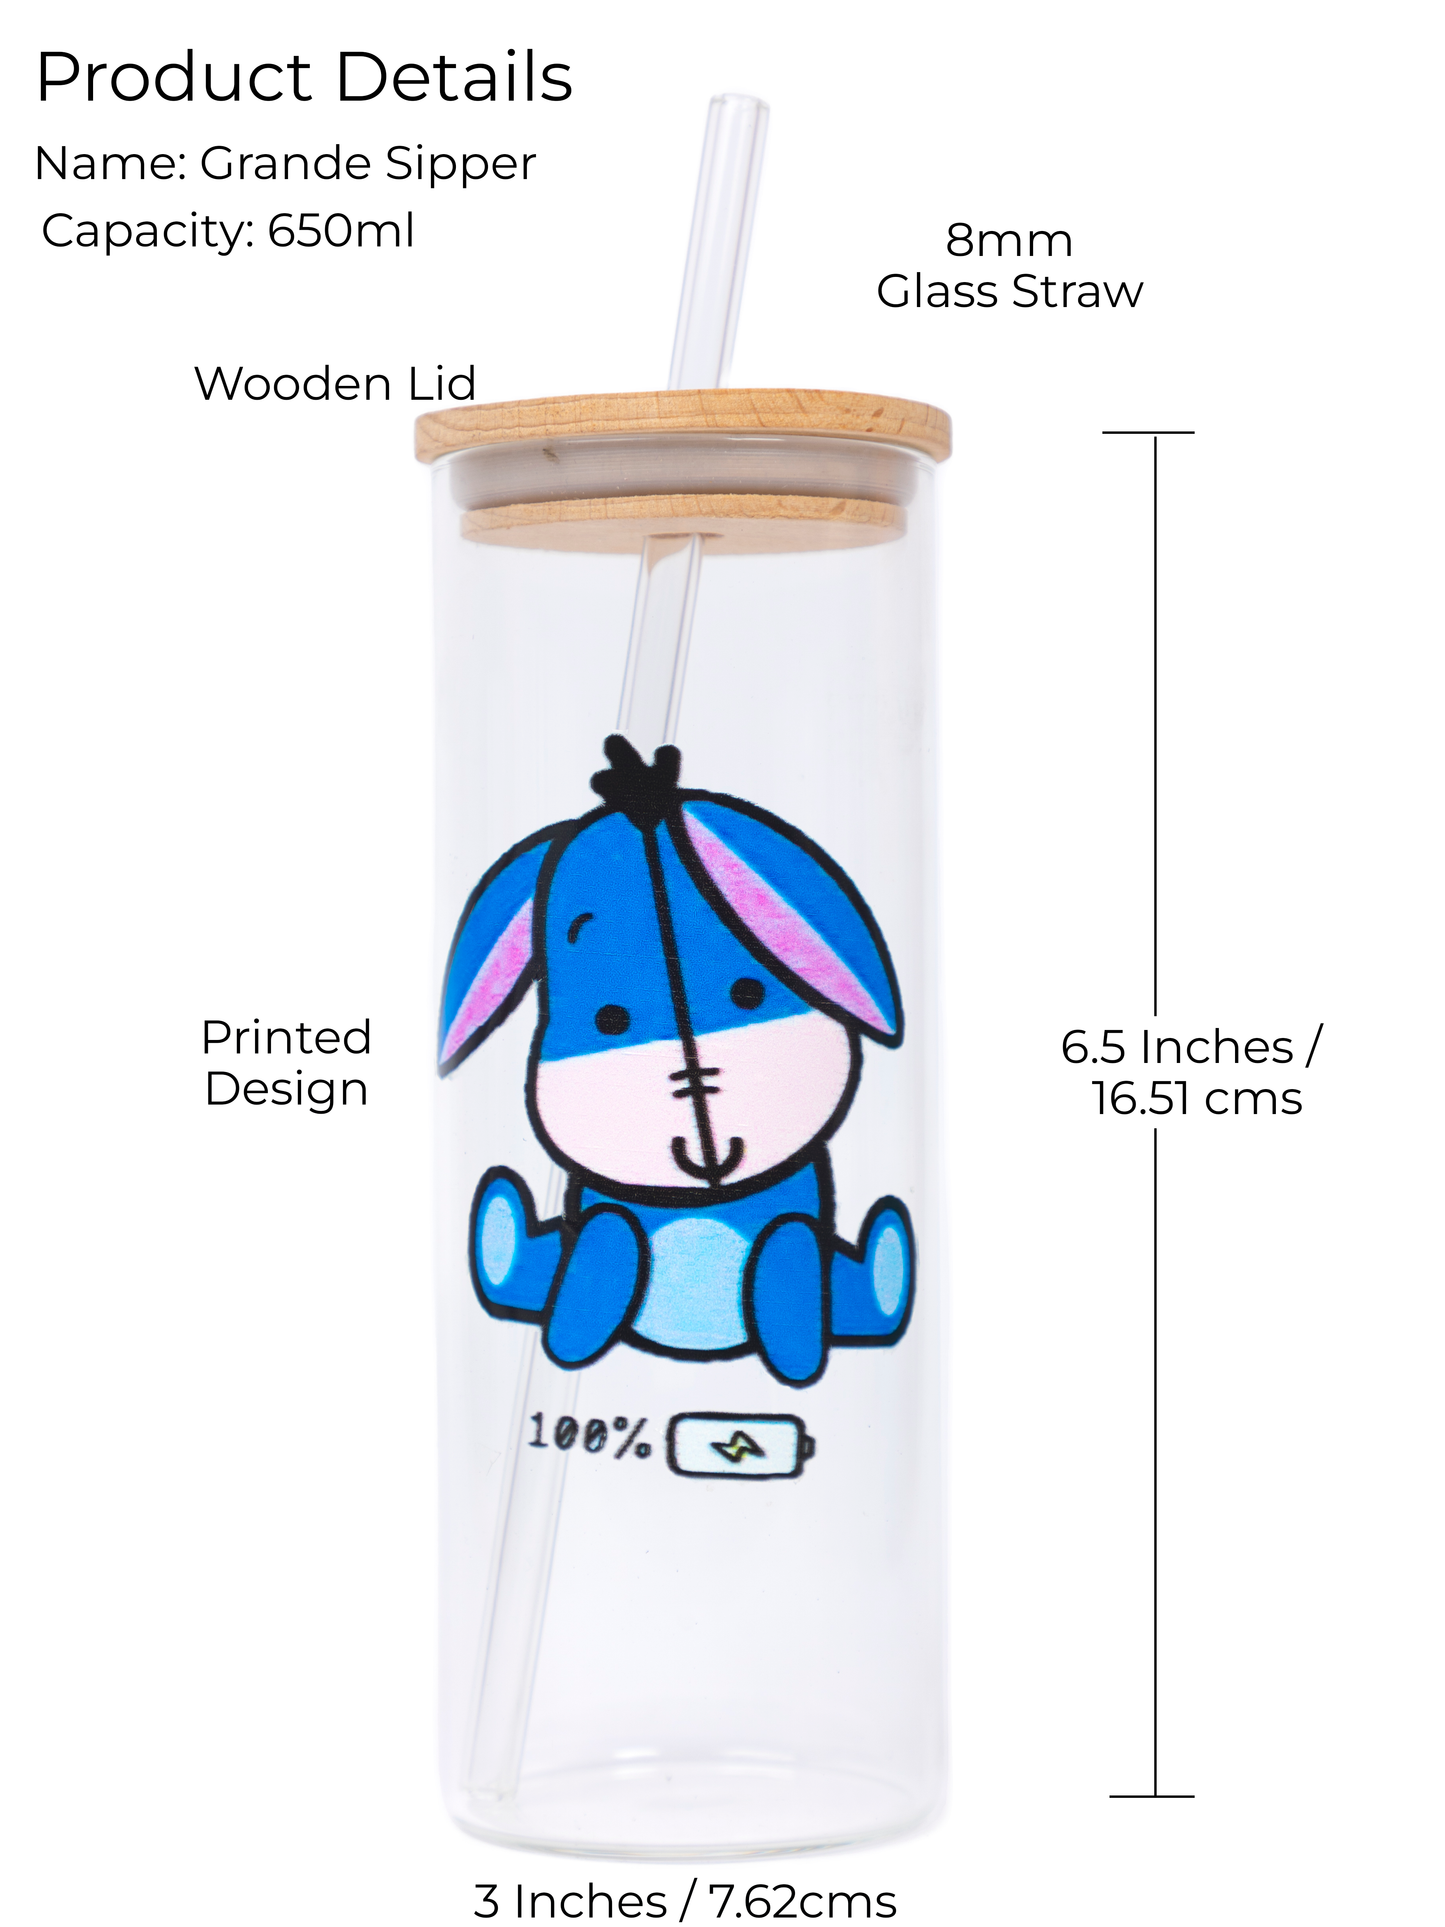 Clear Grande Sipper 650ml| Eyoree Print| 22 oz Coffee Tumbler with Straw and Lid